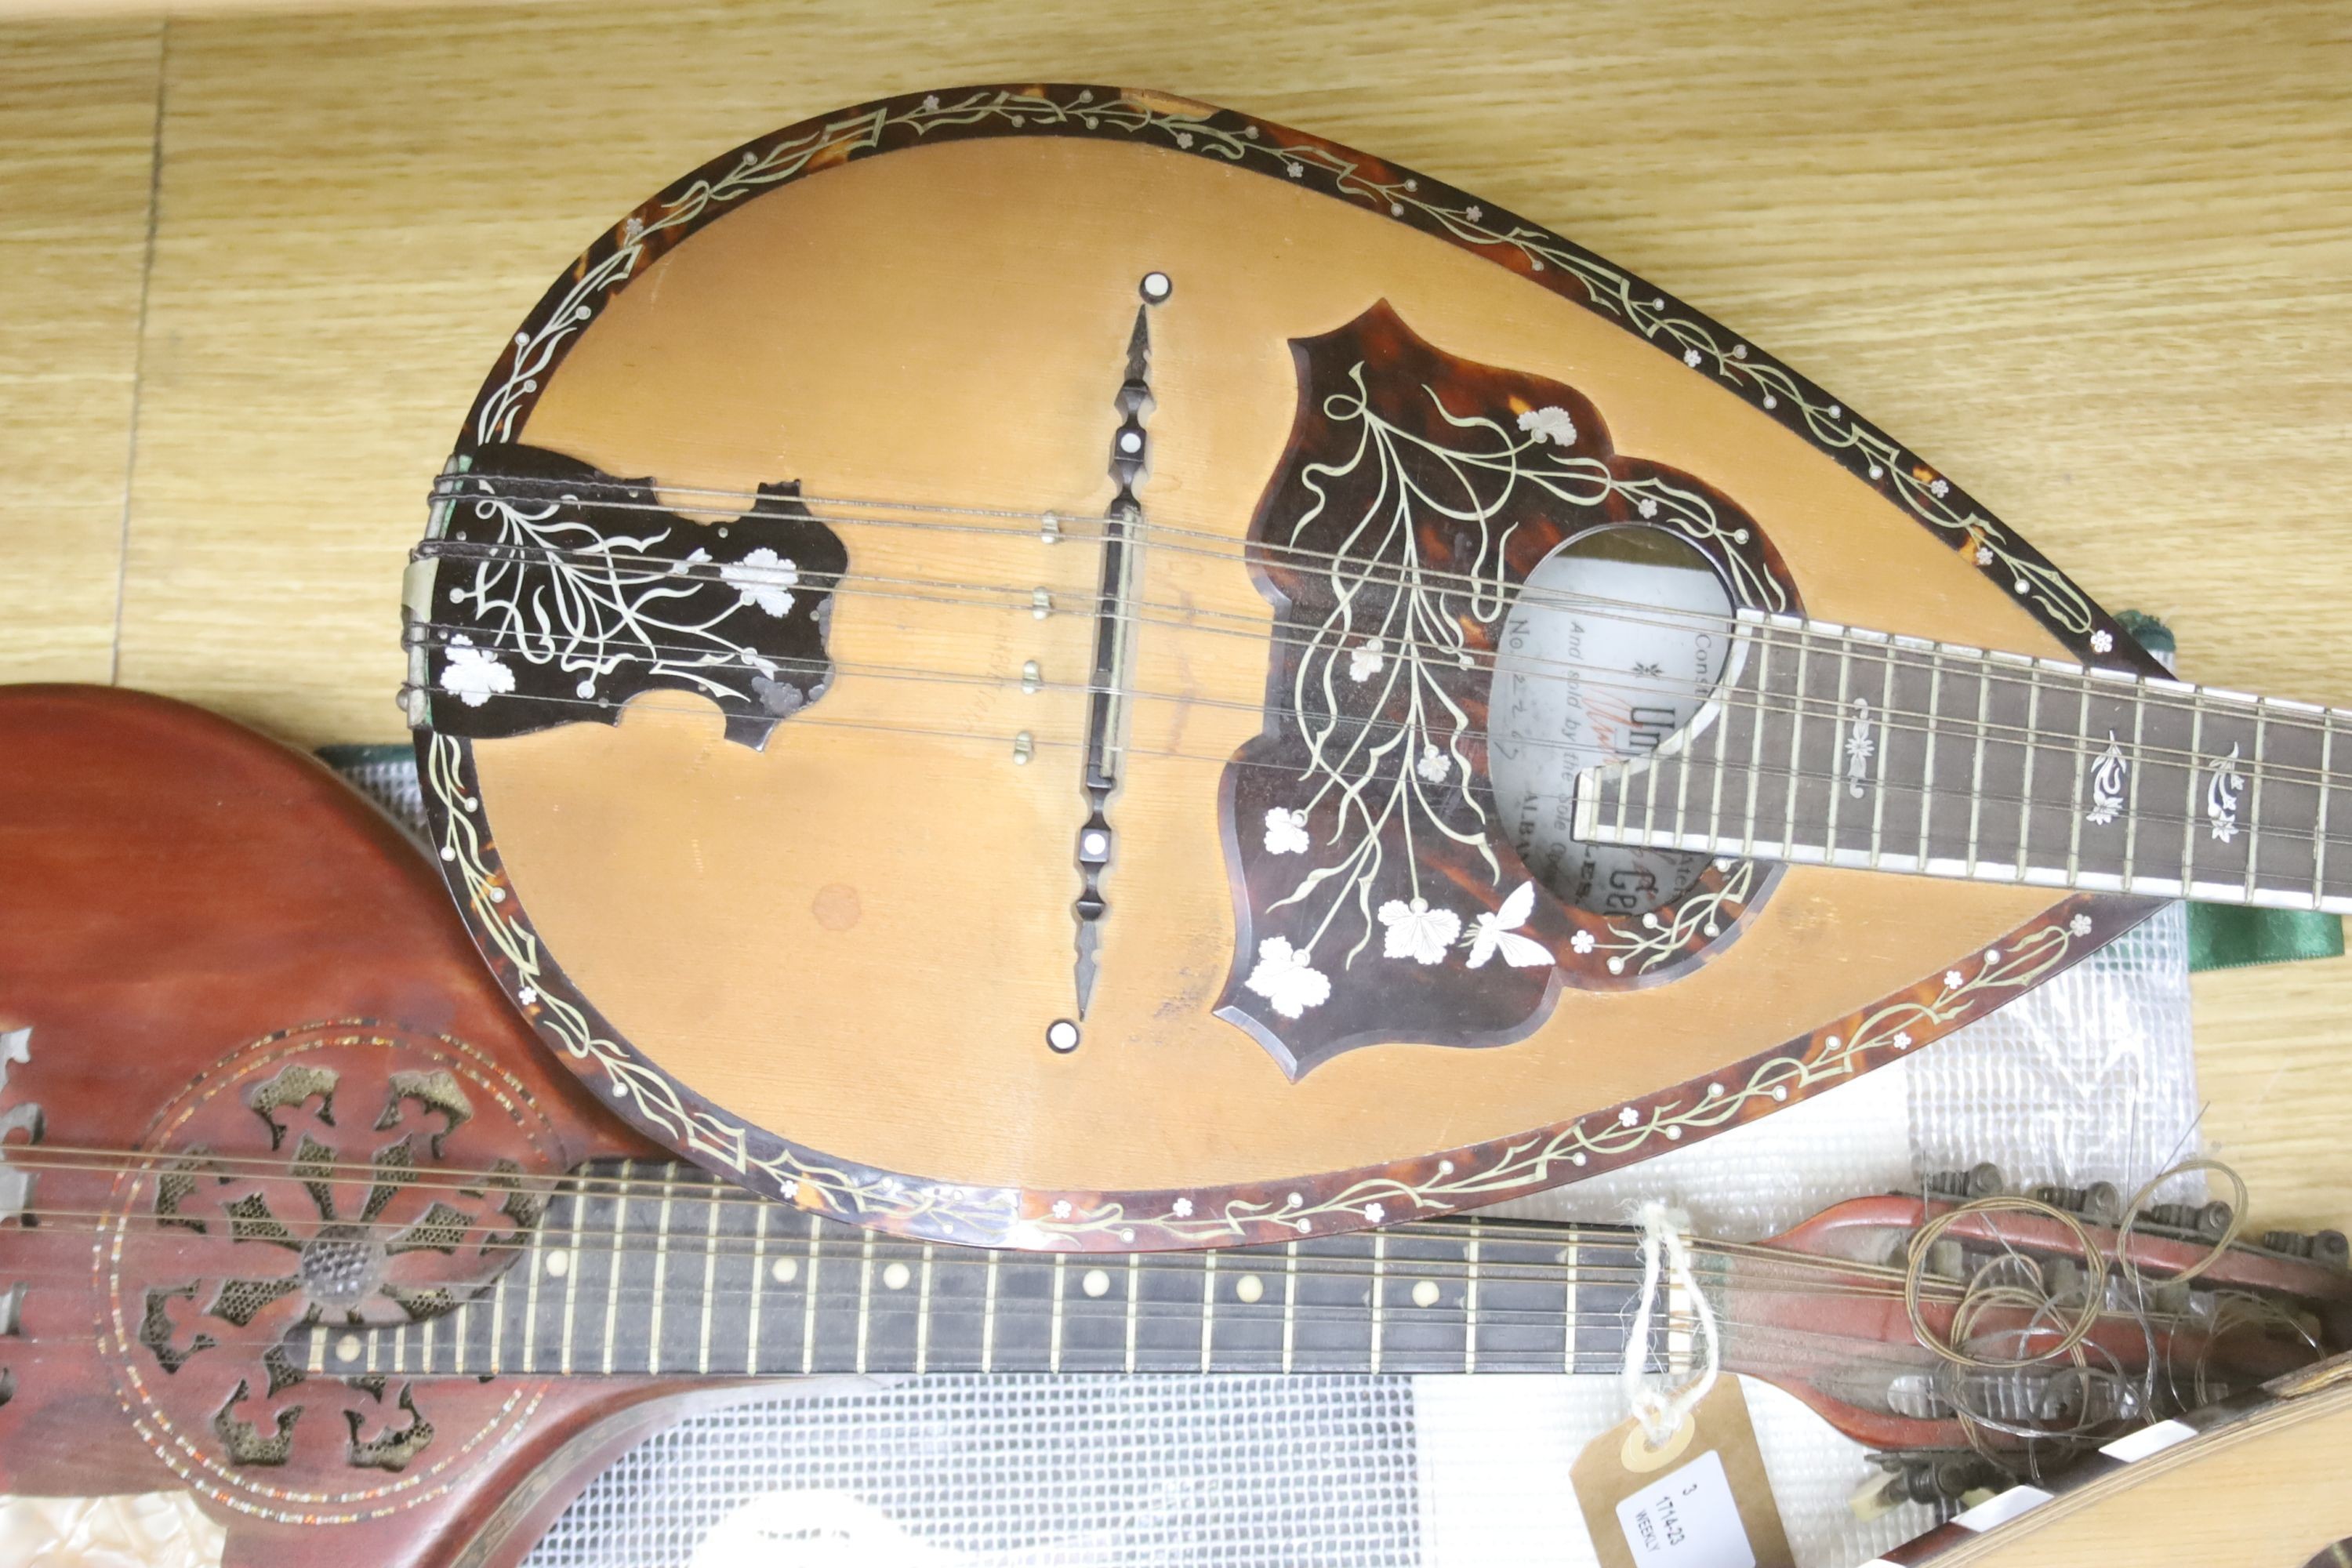 Three Neapolitan mandolins with inlaid mother of pearl decoration, one of round-backed form, the other two archtop